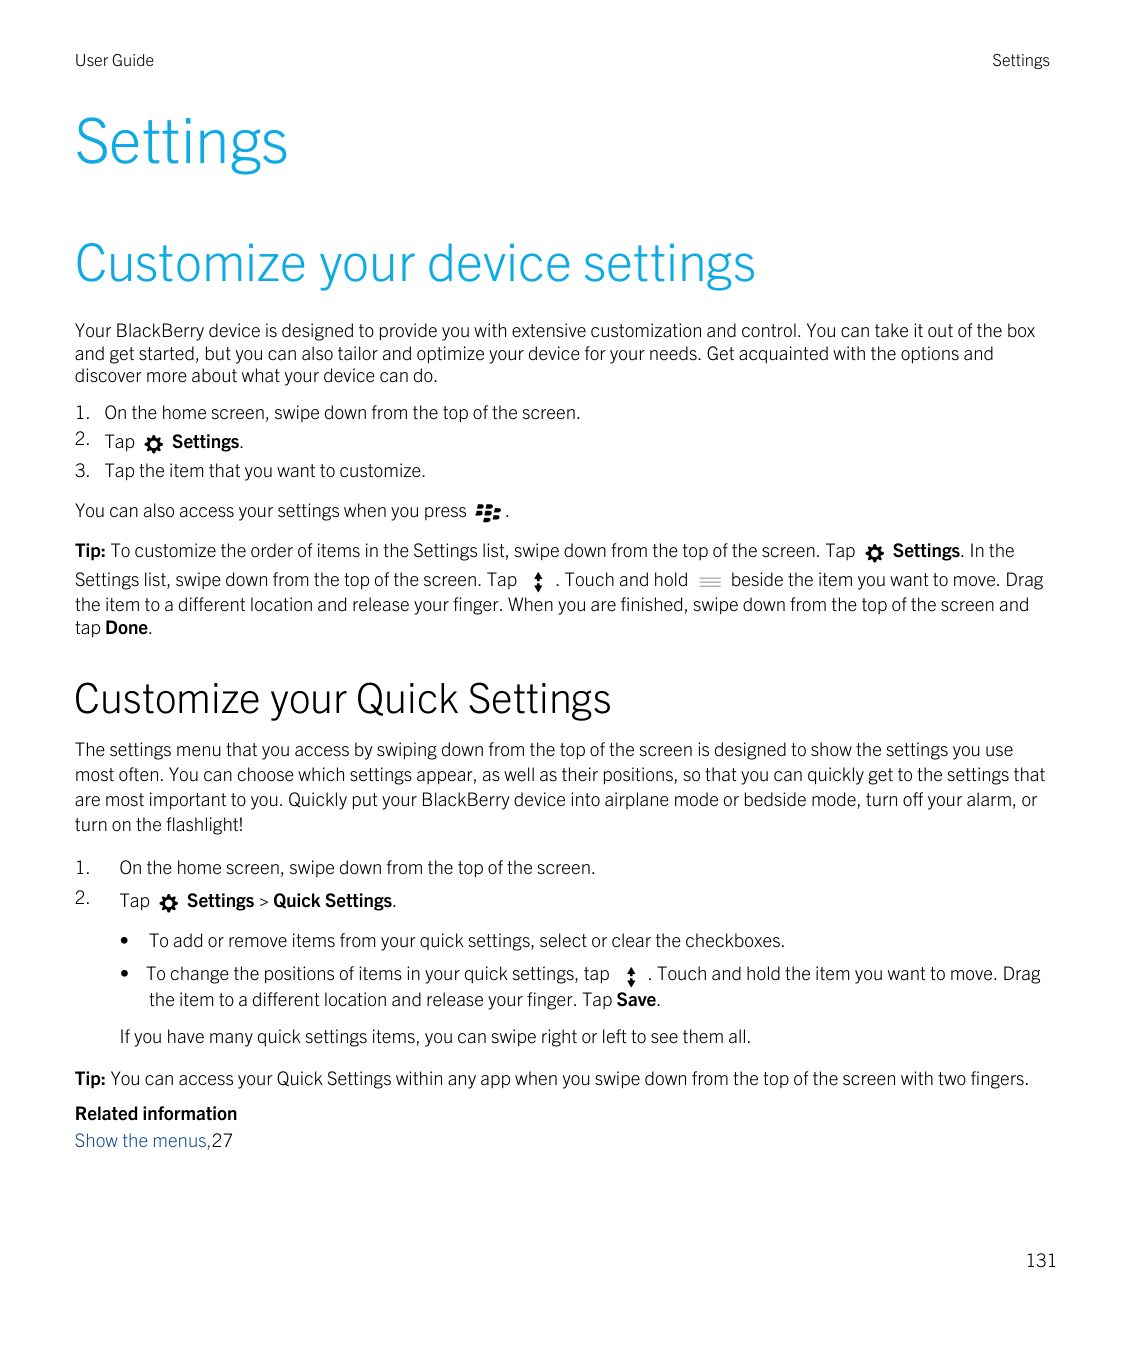 User GuideSettingsSettingsCustomize your device settingsYour BlackBerry device is designed to provide you with extensive customi